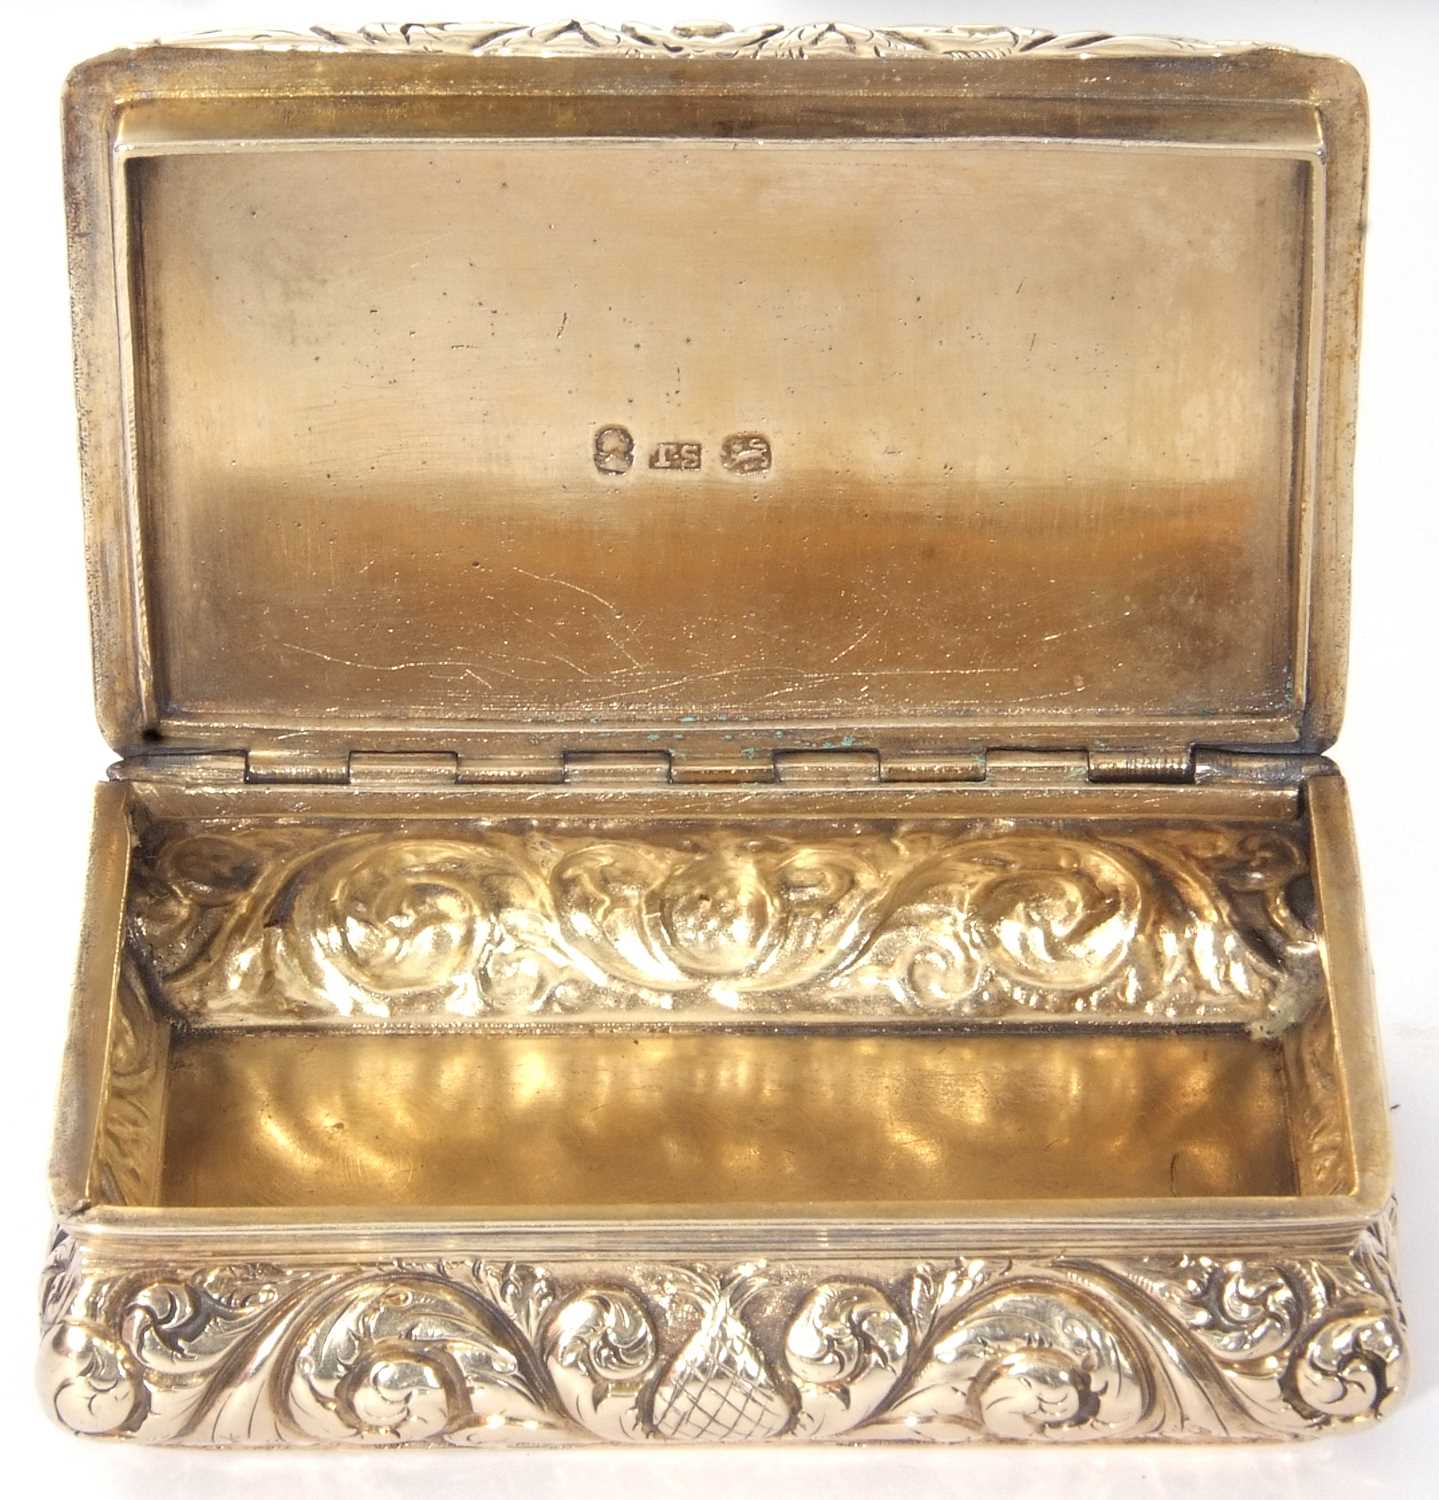 George IV heavy cast silver gilt snuff box of bombe sided rectangular form, the lid with raised - Image 8 of 8